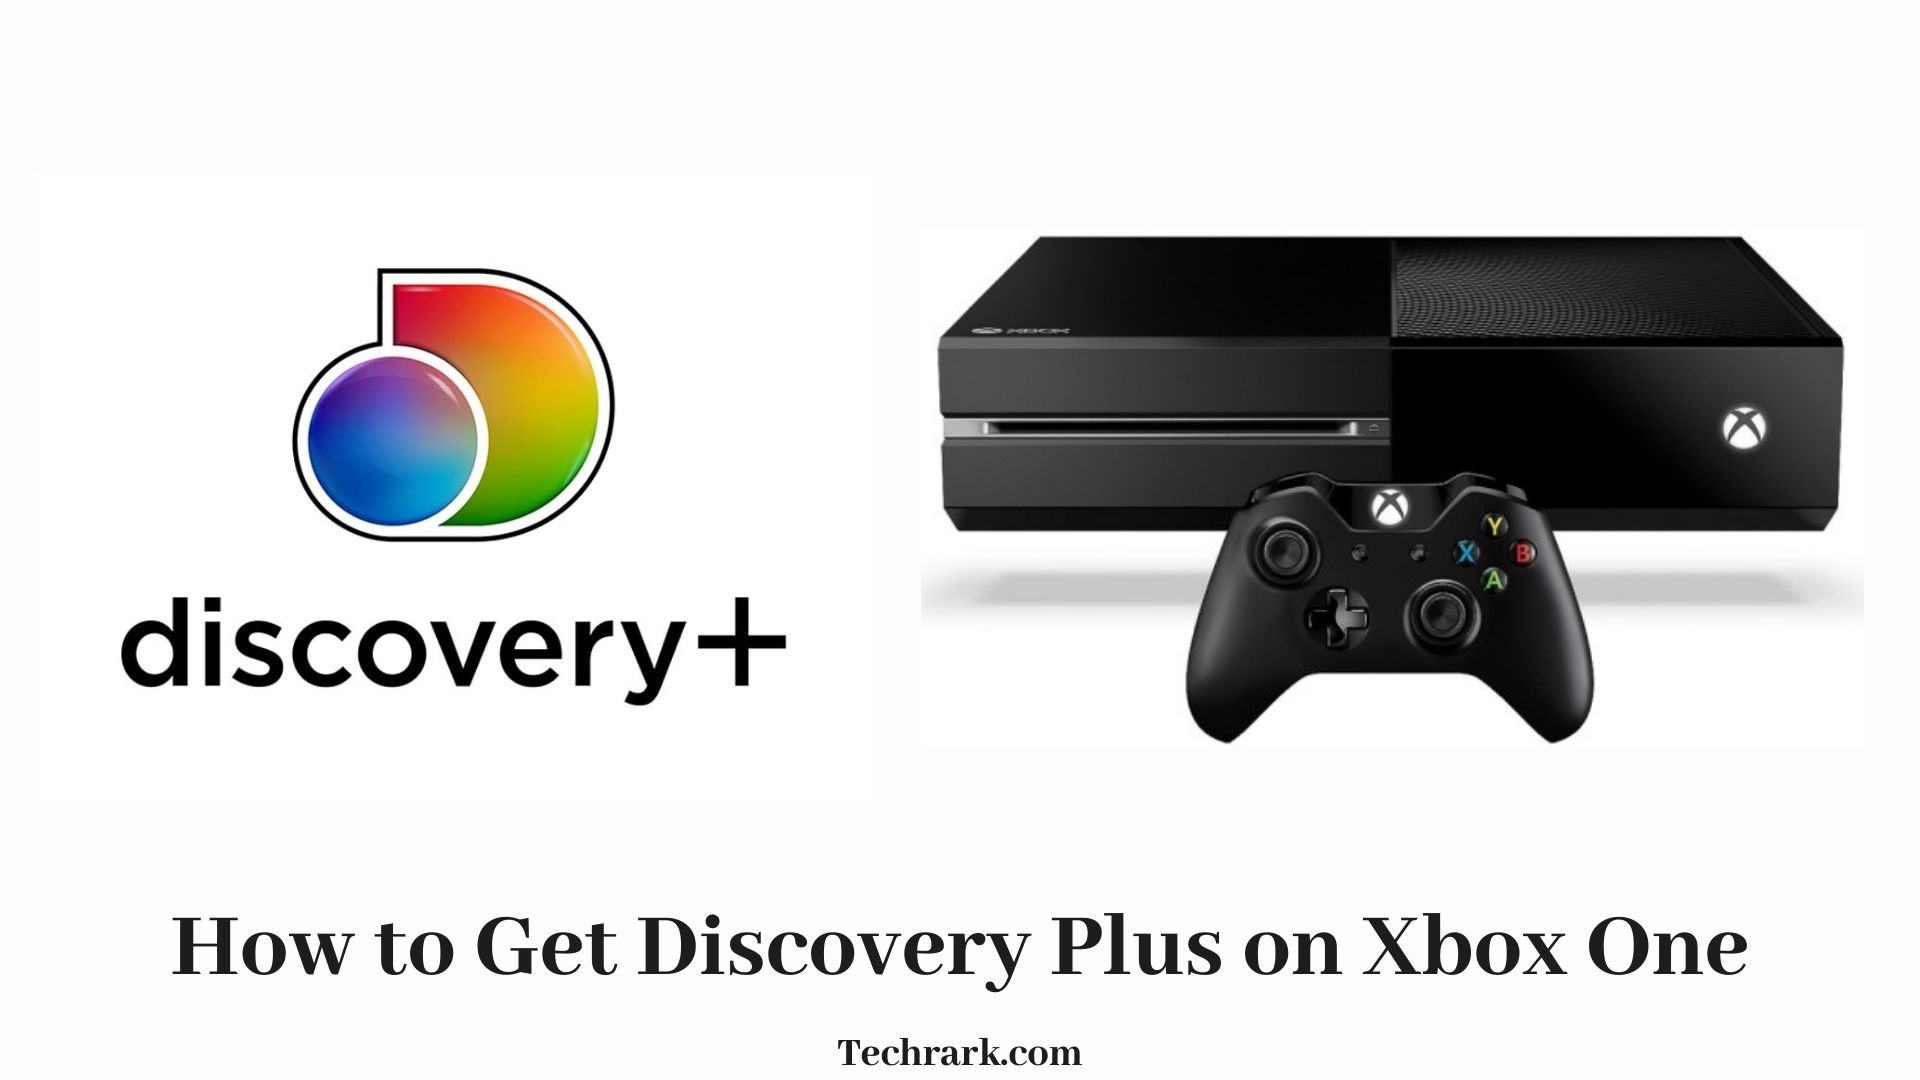 Discovery Plus on Xbox One